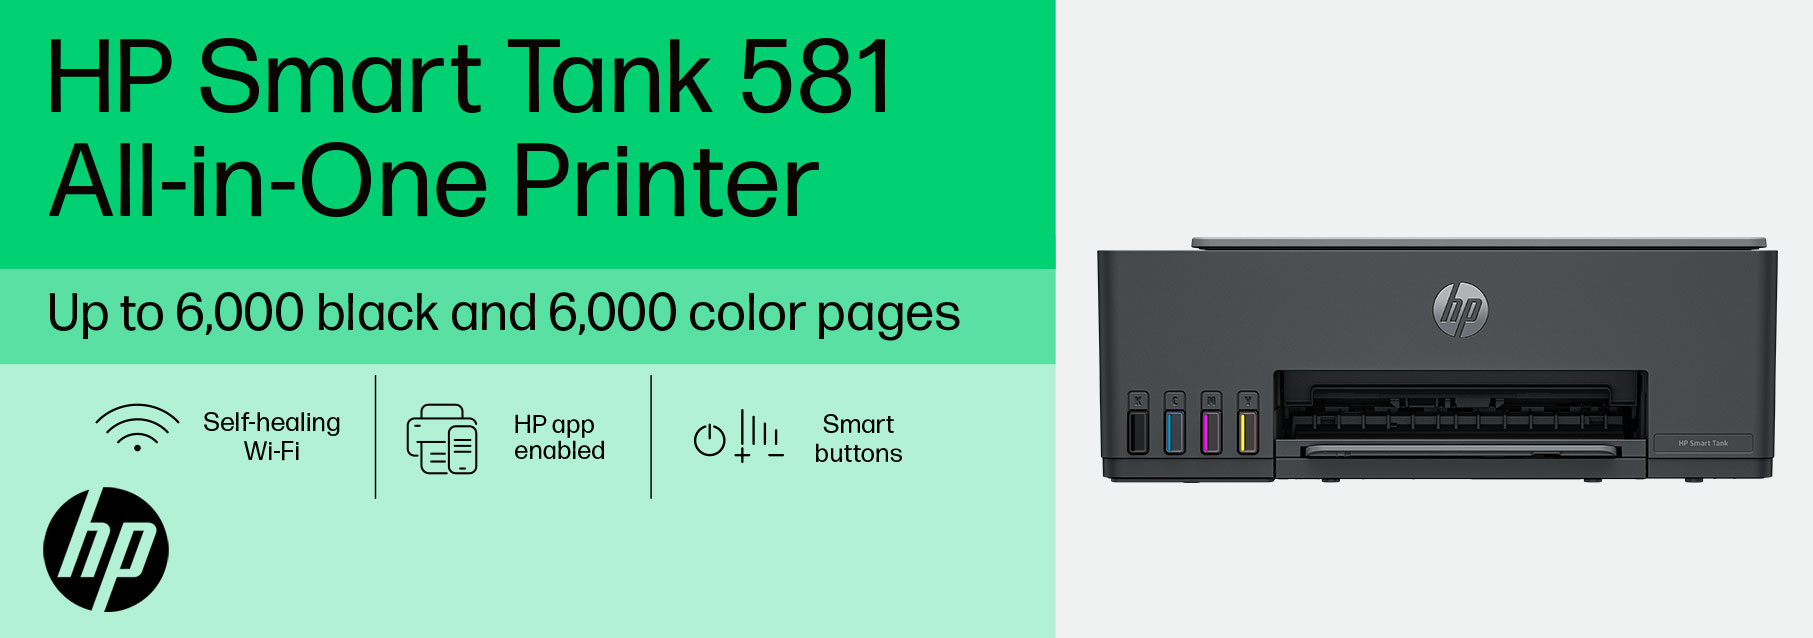 HP Smart Tank 581 All in One Printer